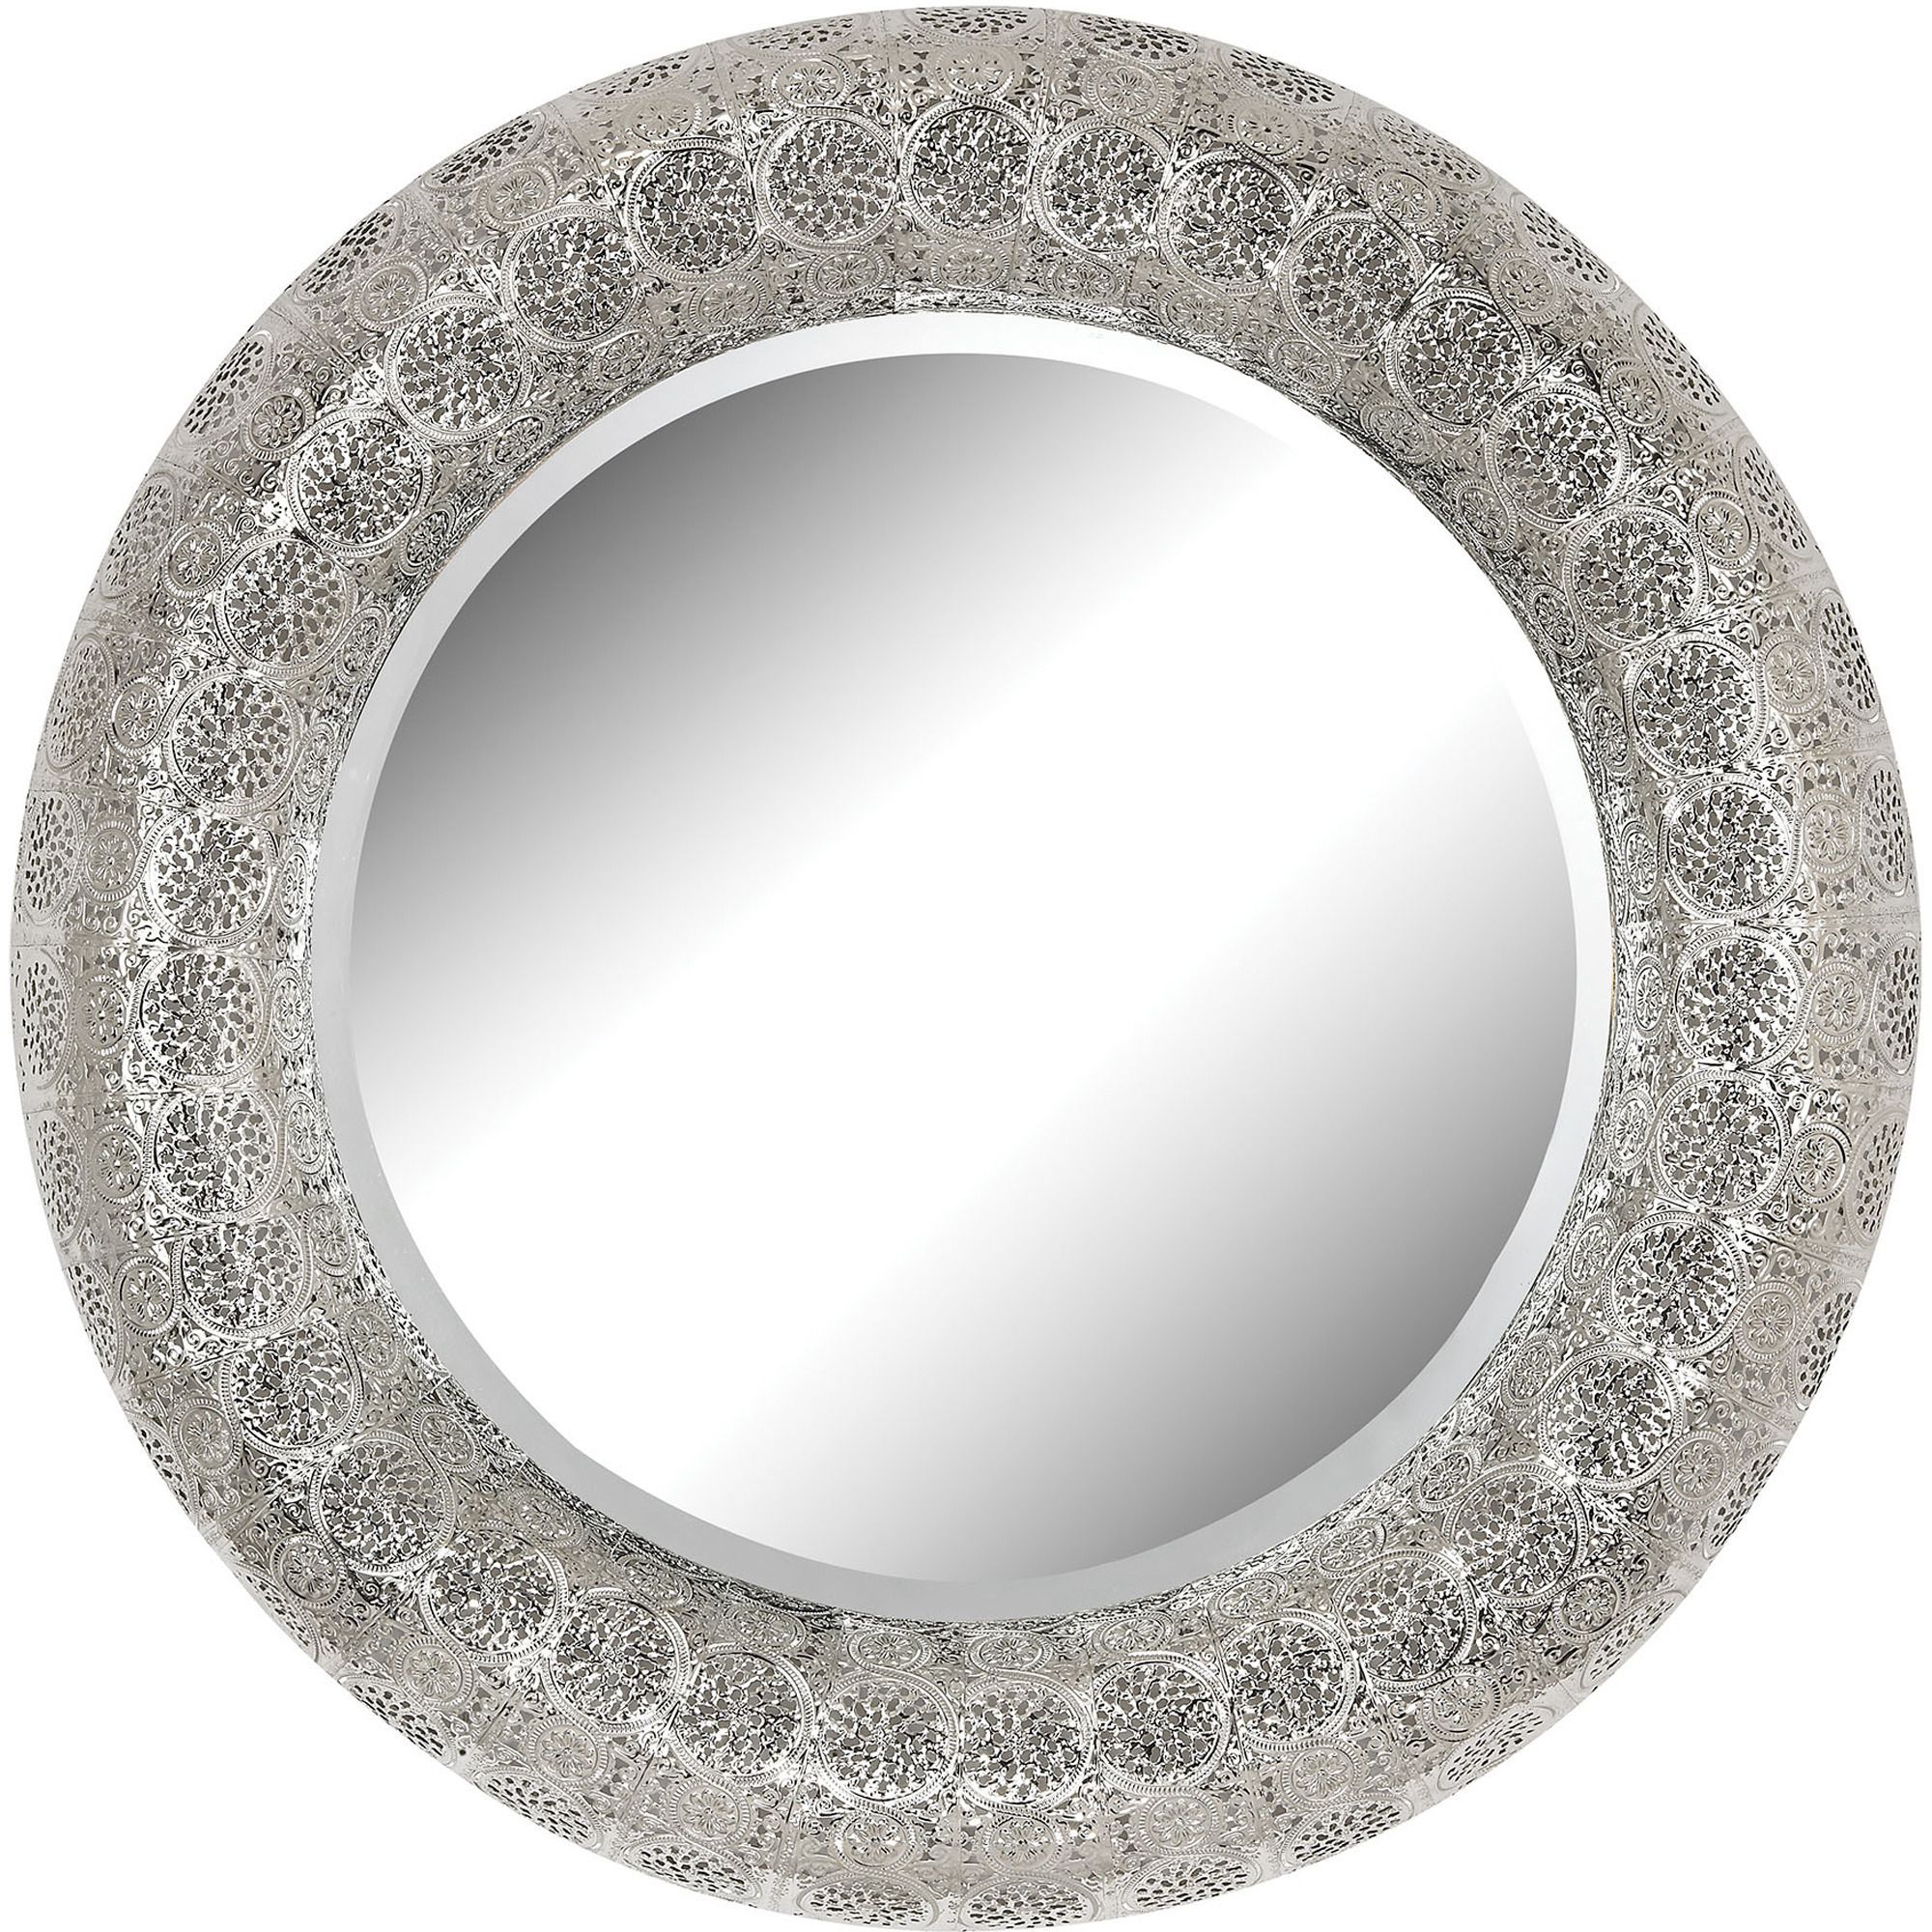 Embossed Metal Frame Mirror In Silver | Sterling | Home Gallery Stores With Regard To Metallic Silver Framed Wall Mirrors (View 9 of 15)